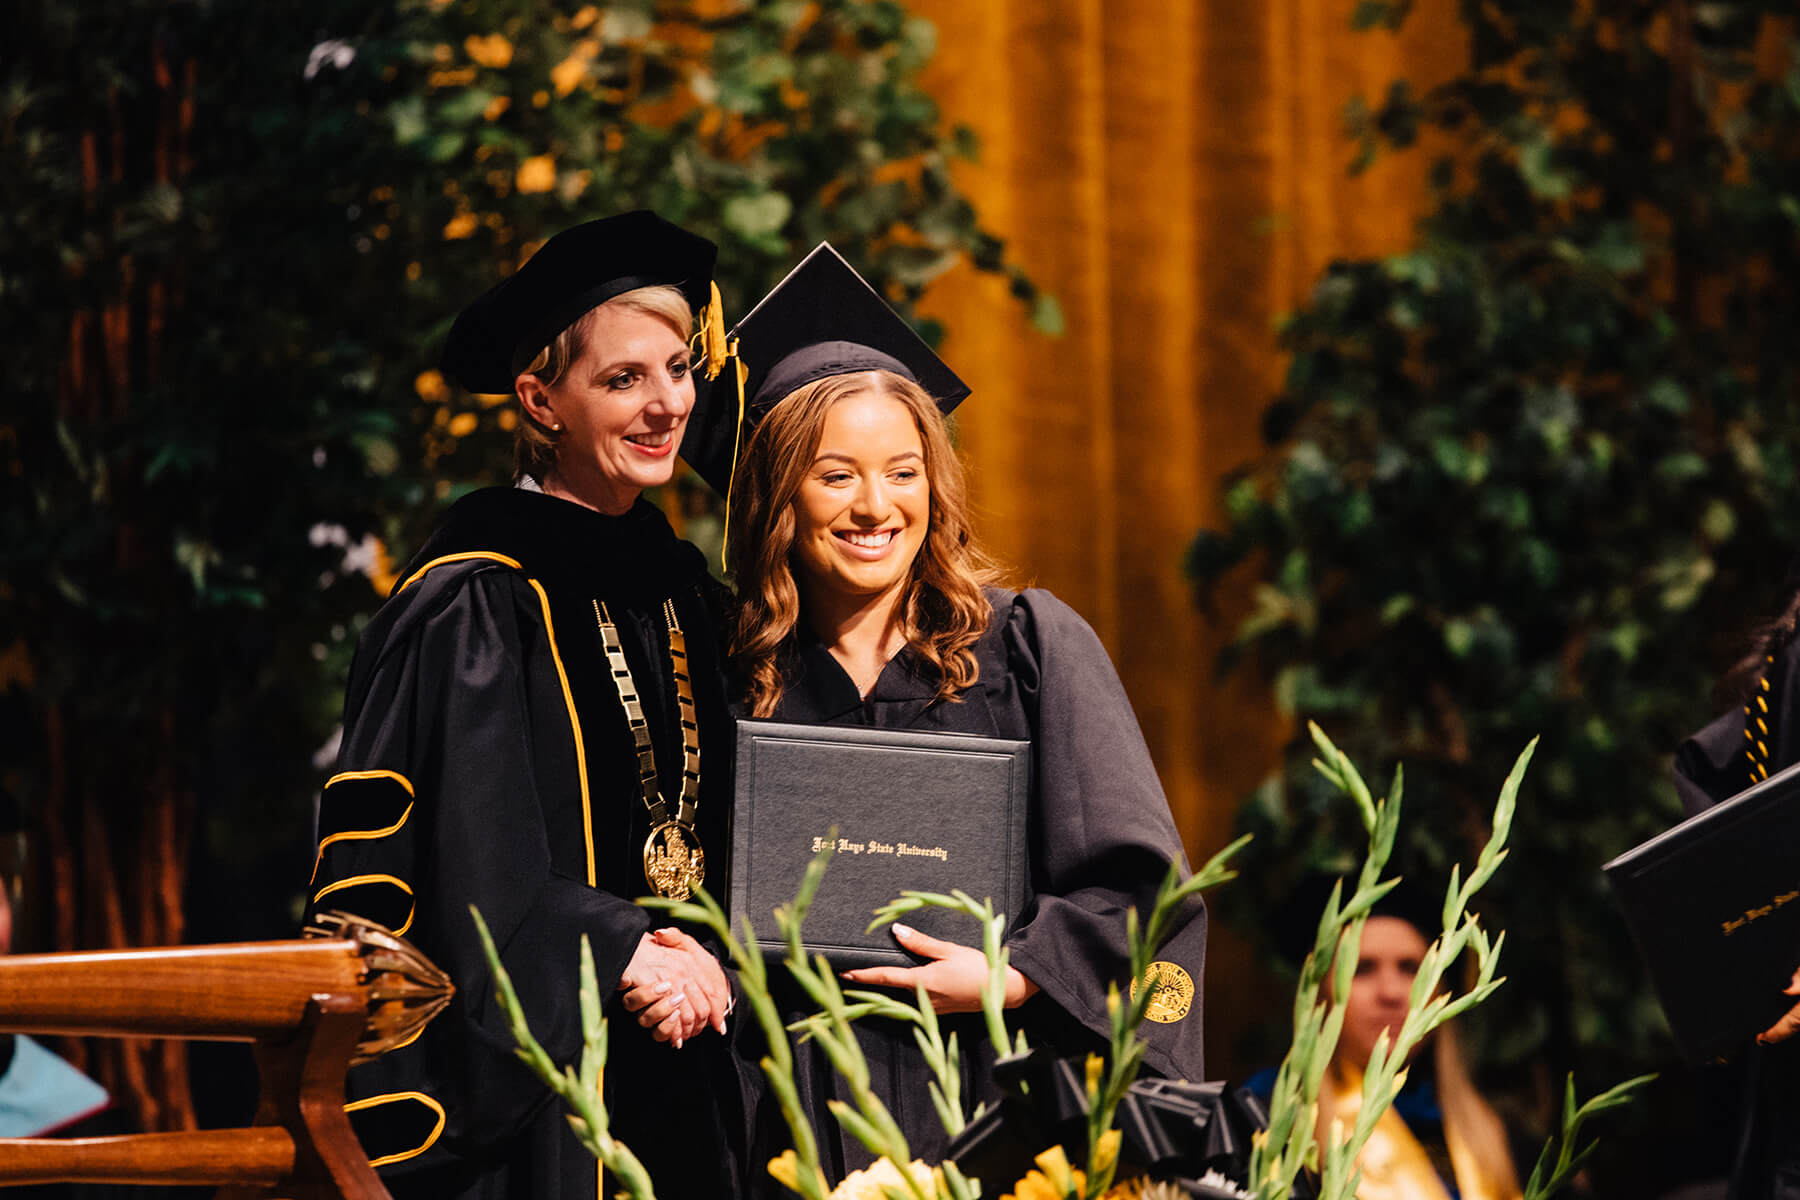 FHSU COMMENCEMENT, SPRING 2021 Fort Hays State University